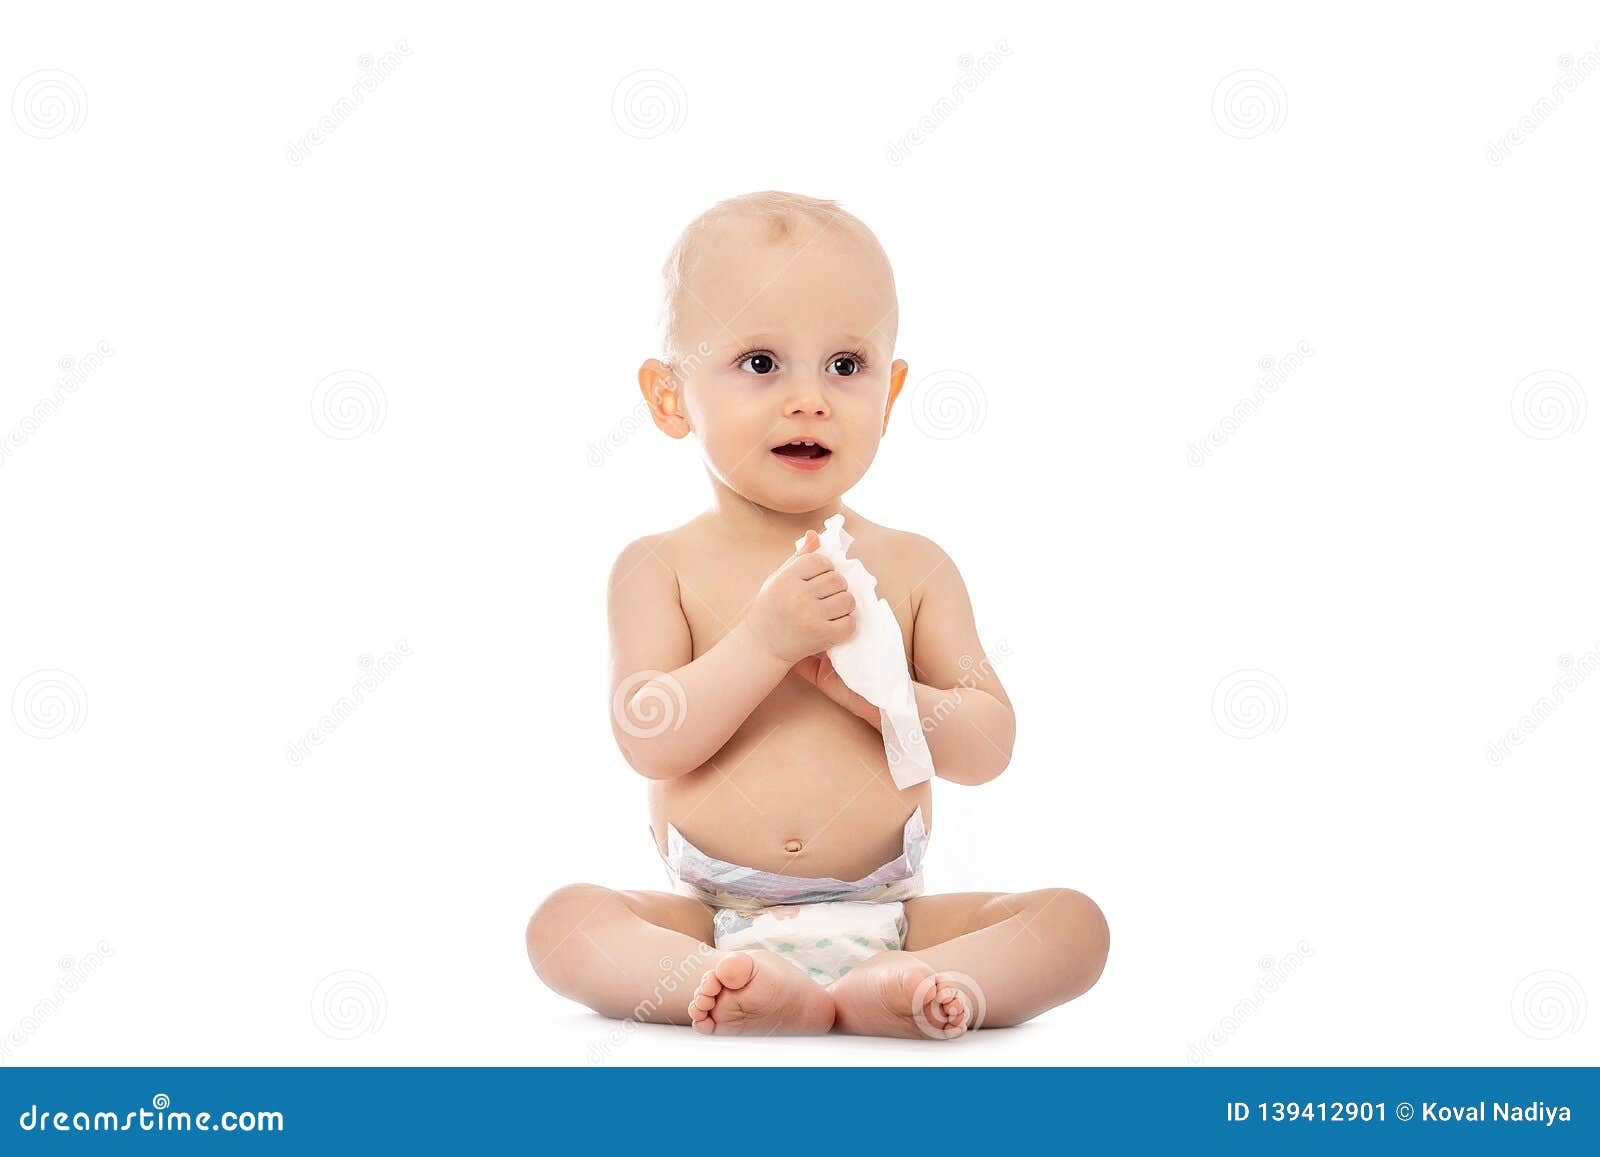 Smiling Funny Baby Getting a Diaper Change. with Wipe Isolated on a White  Background Stock Image - Image of concept, clean: 139412901